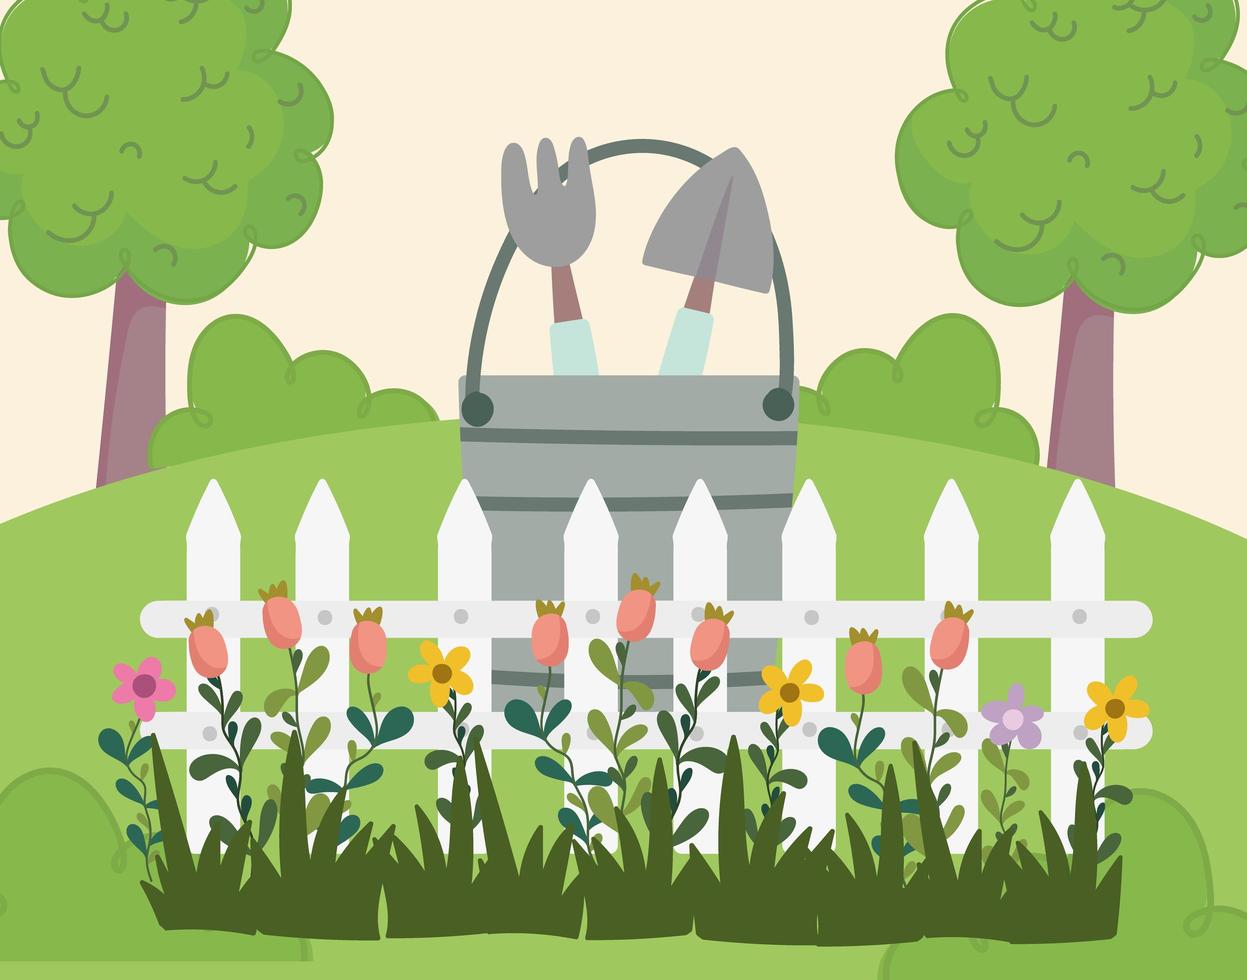 Gardening, bucket with shovel rake fence and flowers grass vector